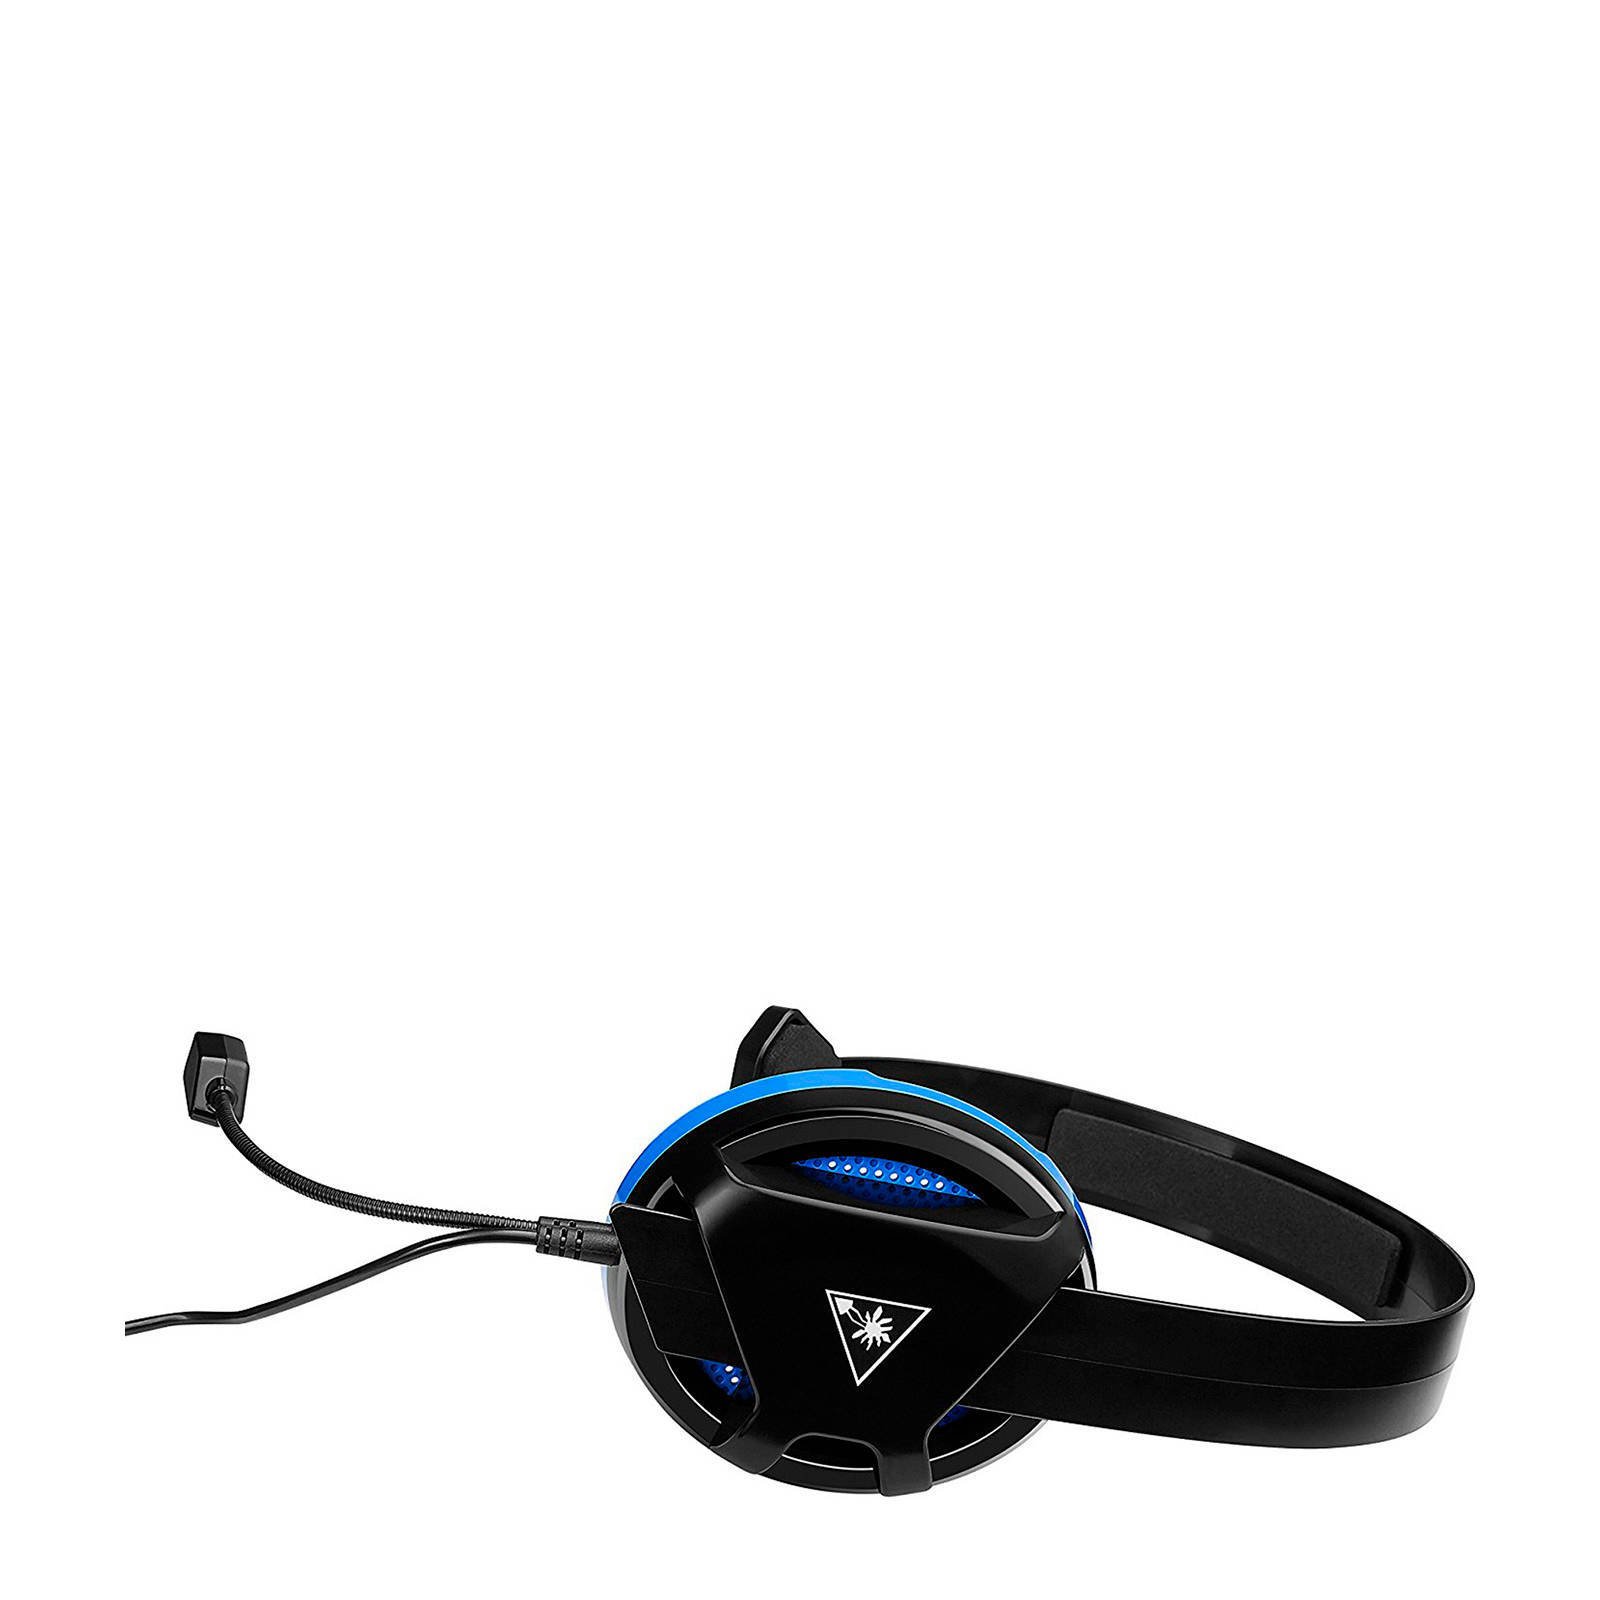 turtle beach recon chat headset ps4